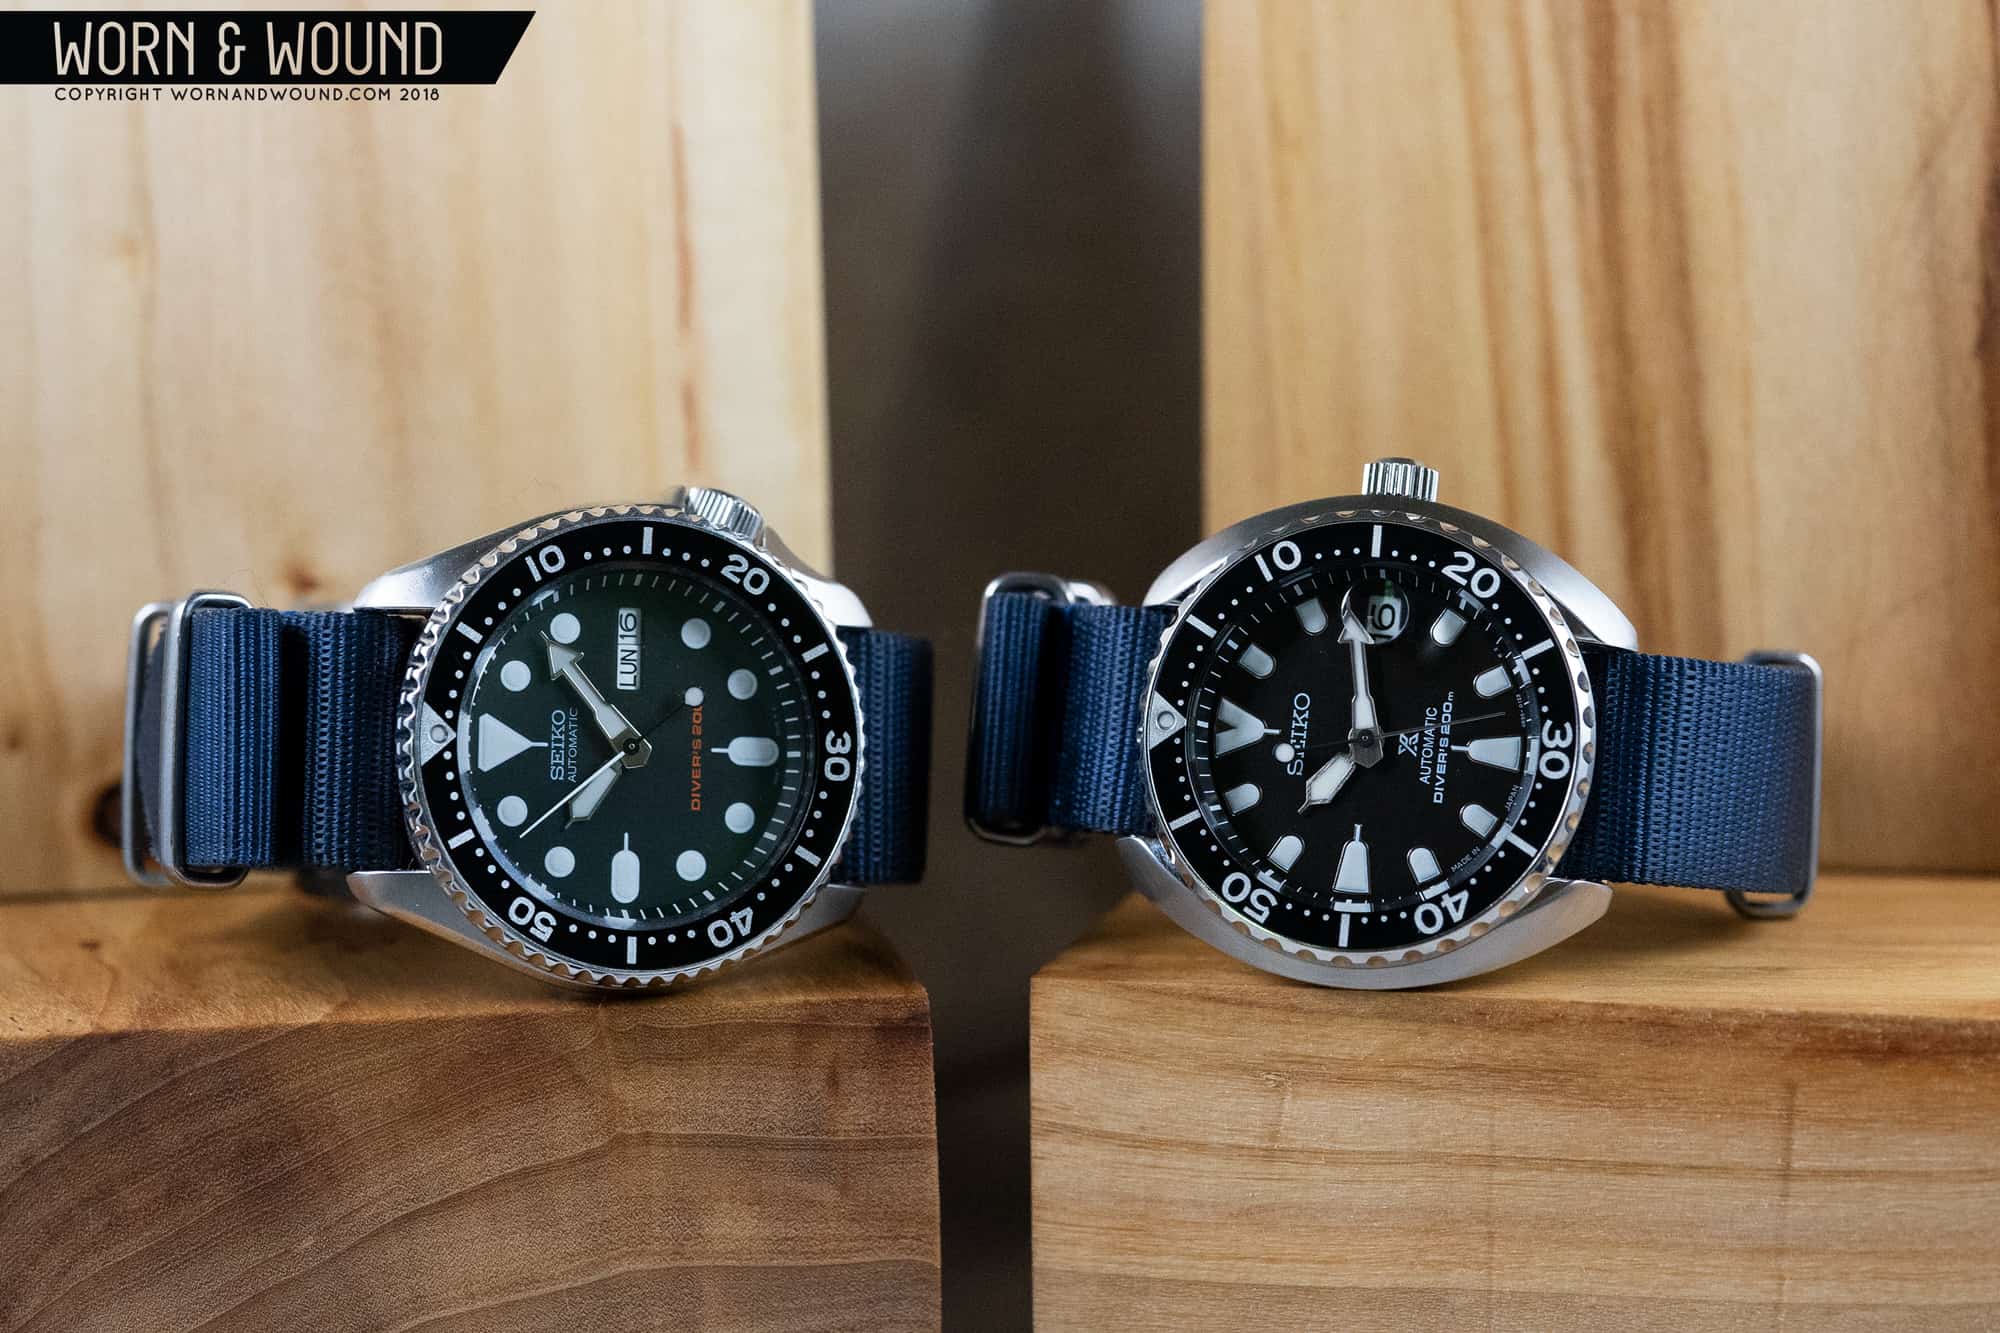 Is the Mini-Turtle the New SKX007? - Wound